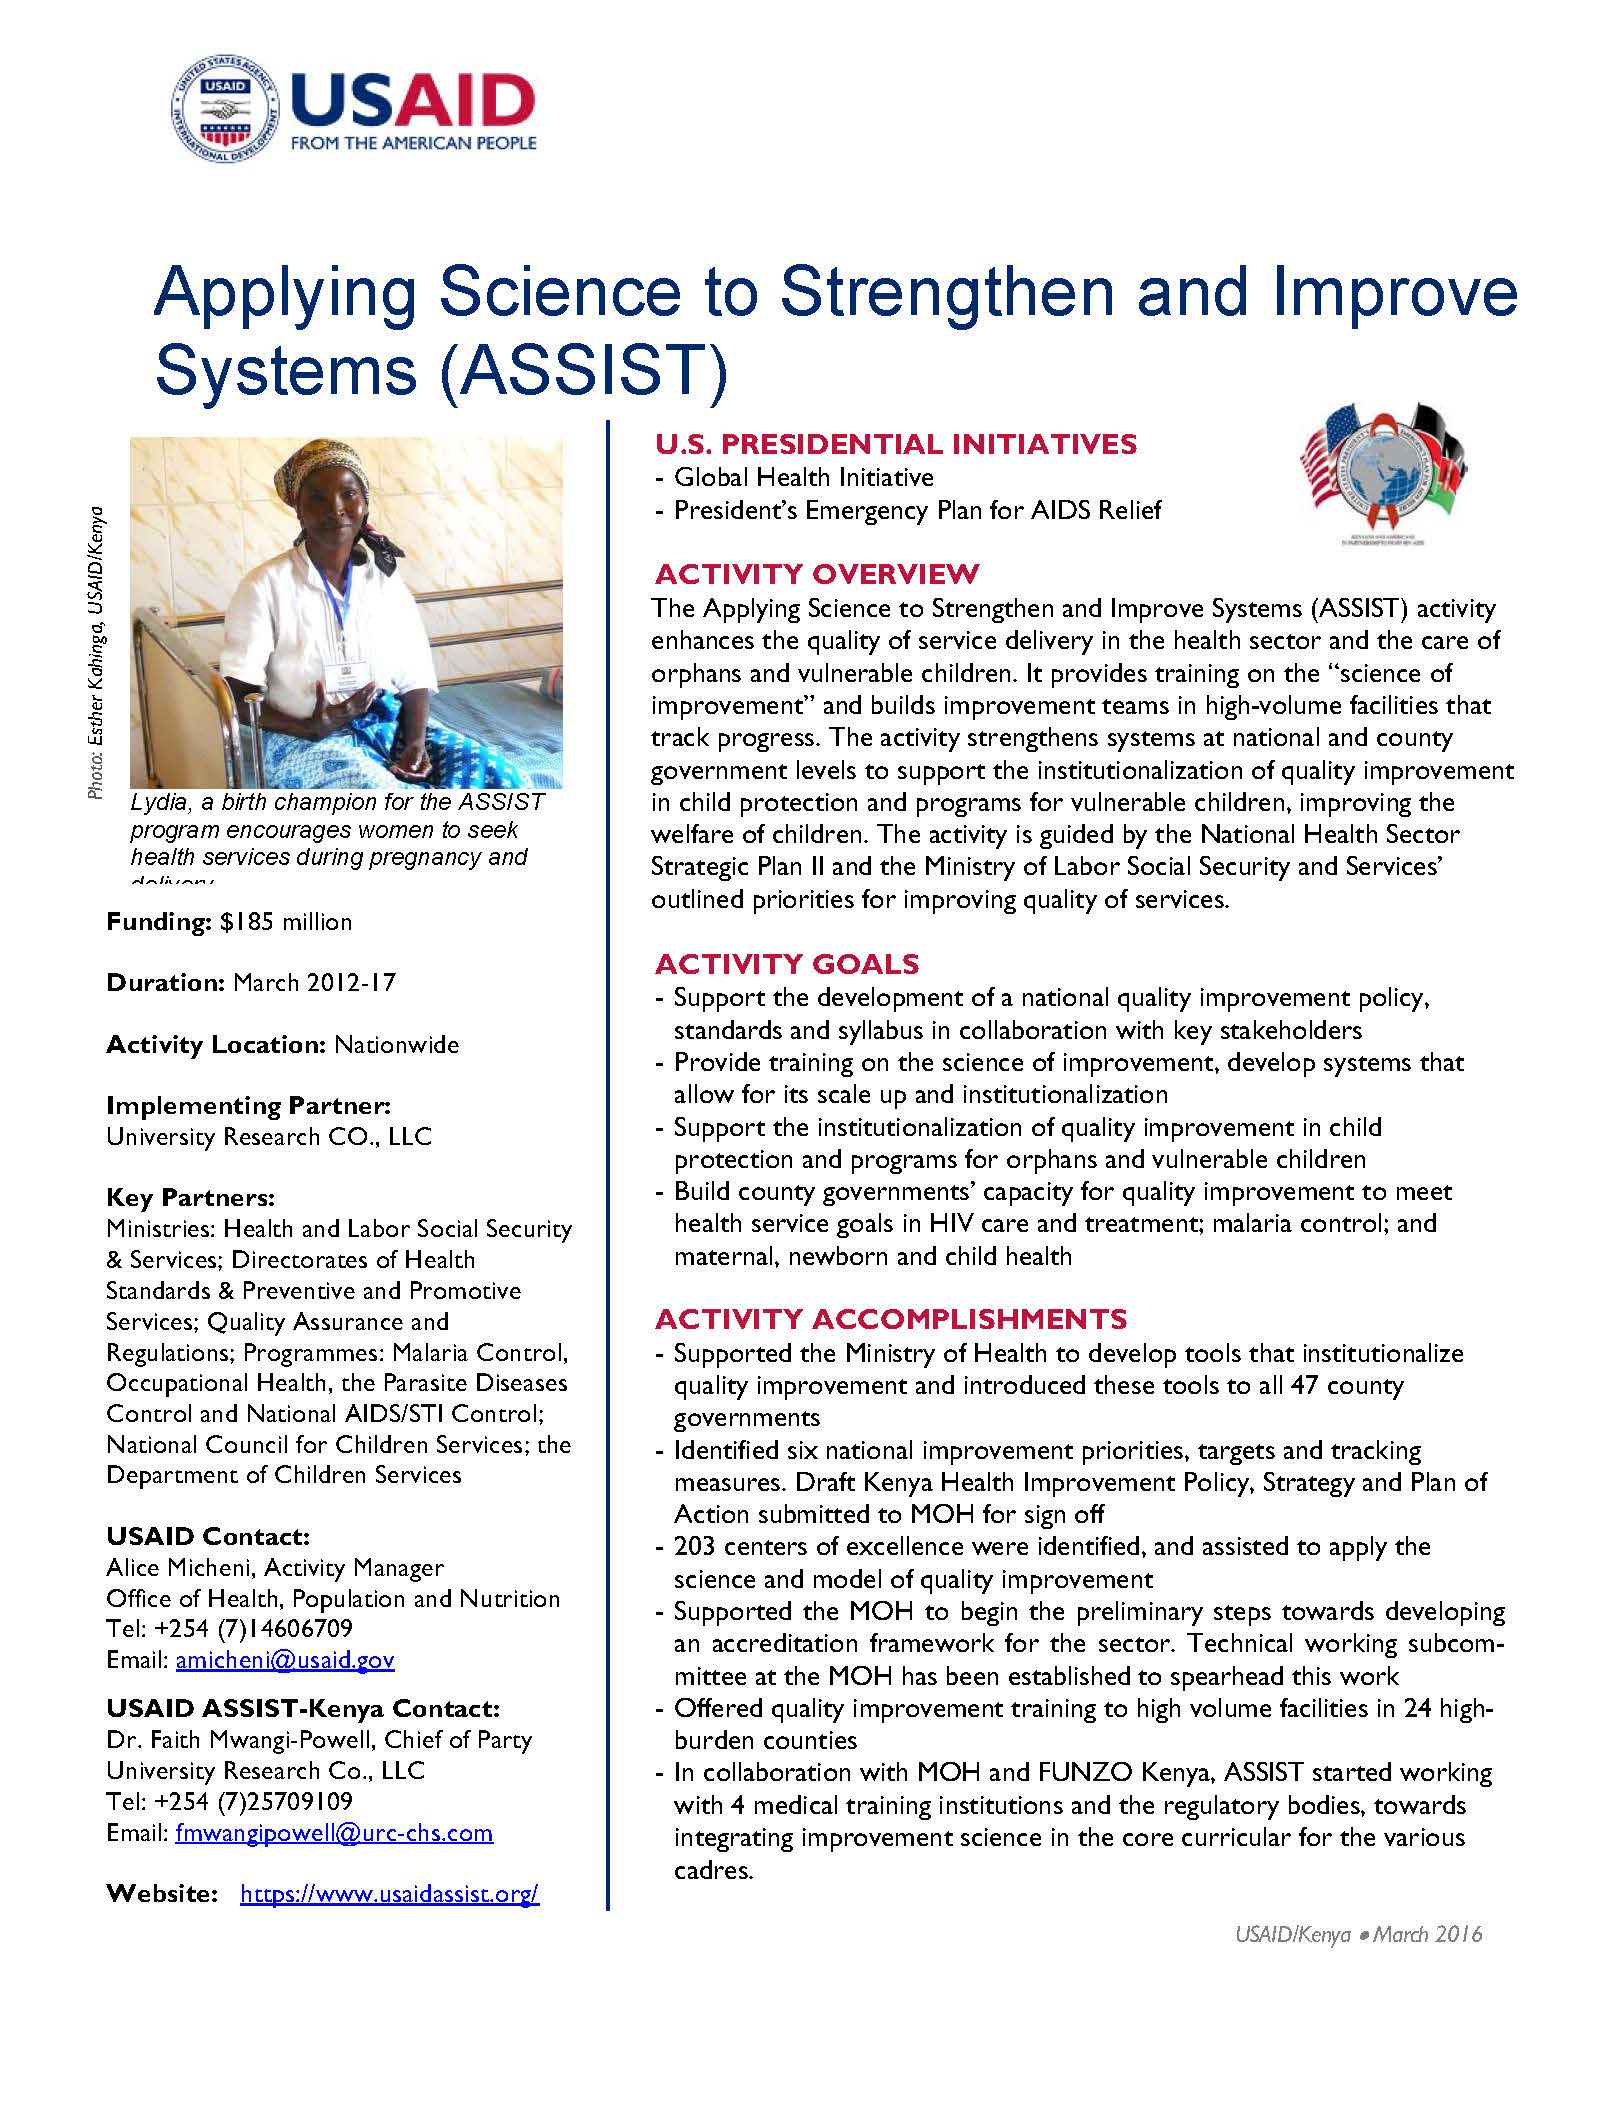 Applying Science to Strengthen and Improve Systems (ASSIST)